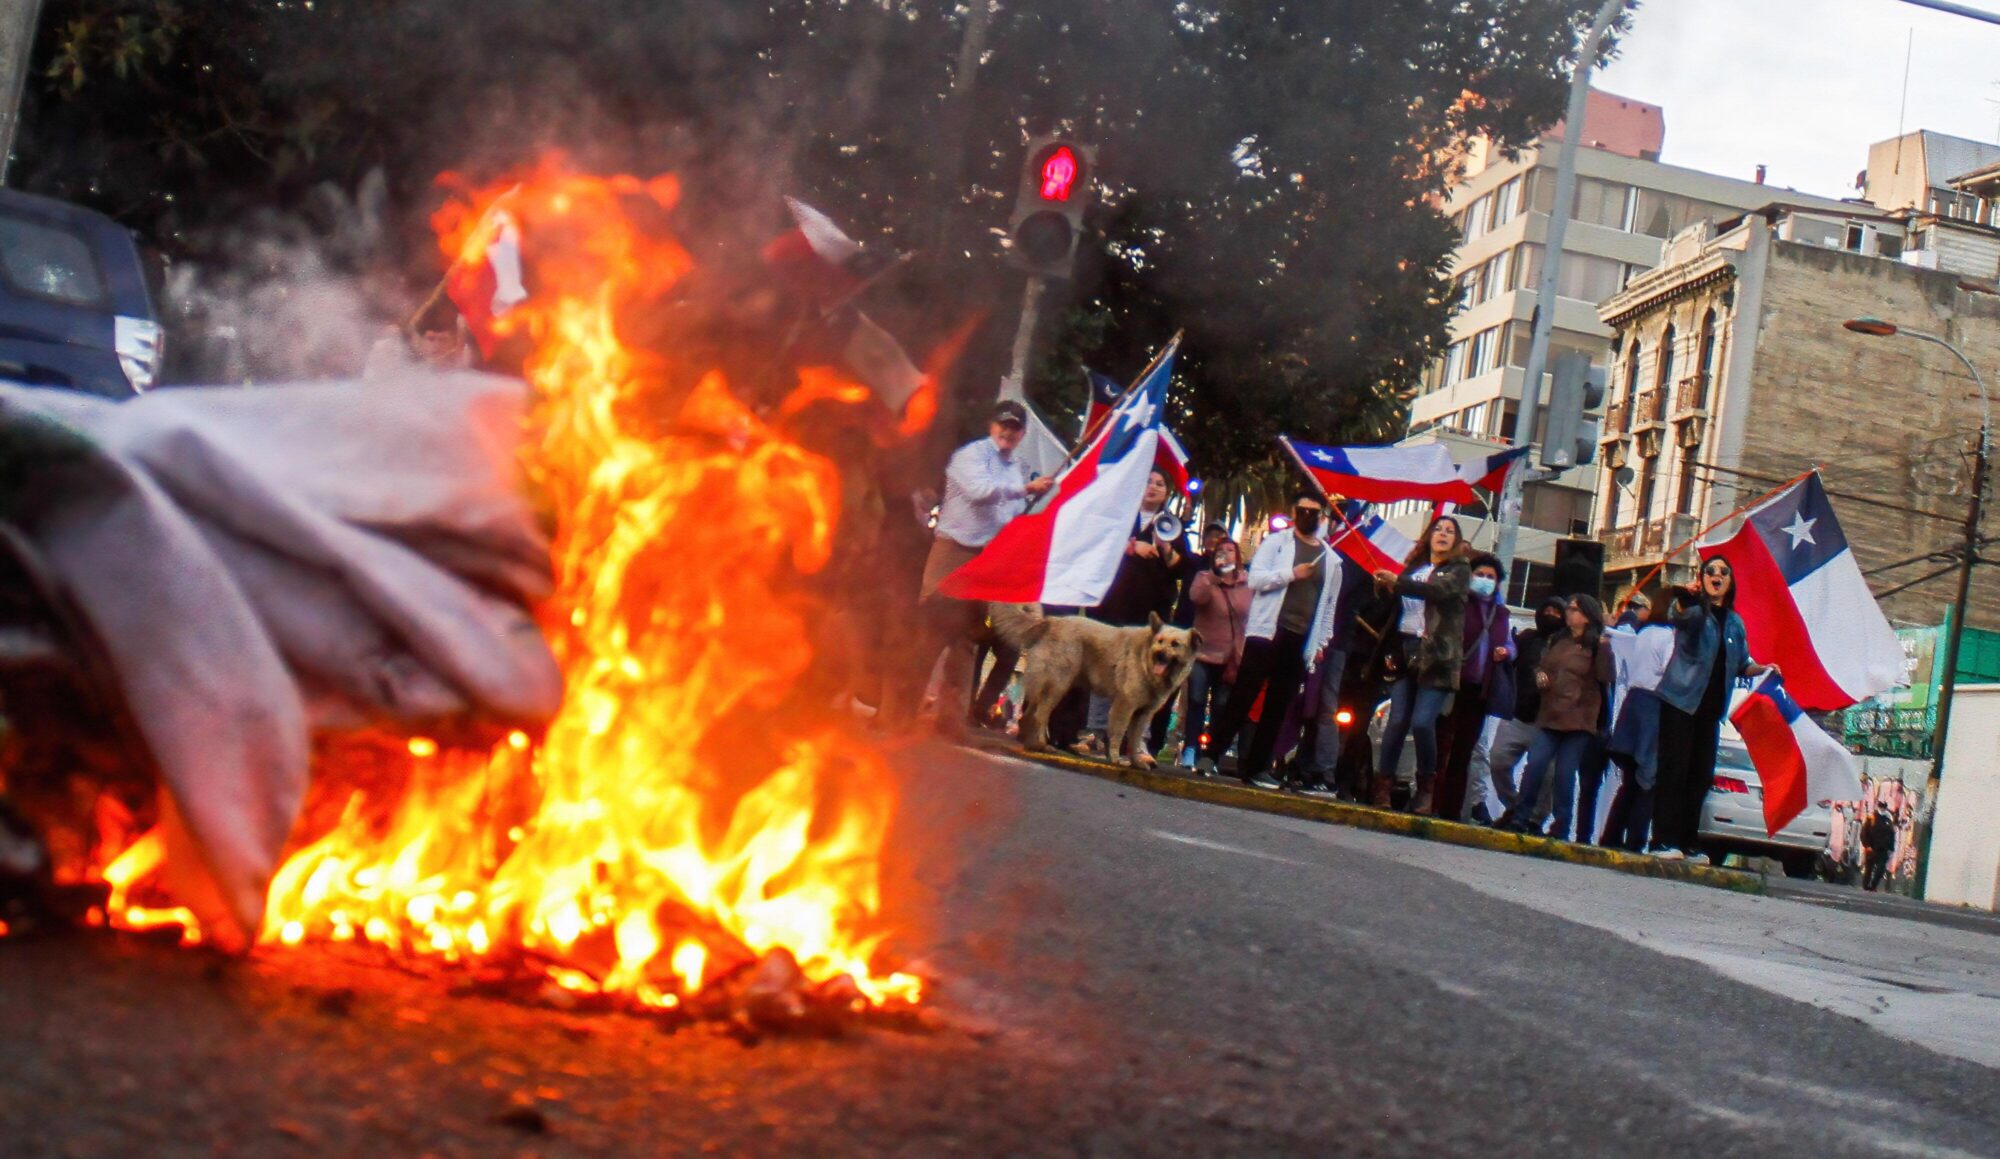 A banner is set on fire as demonstrators hold Chilean flags during a protest against a new constitution in Valparaiso